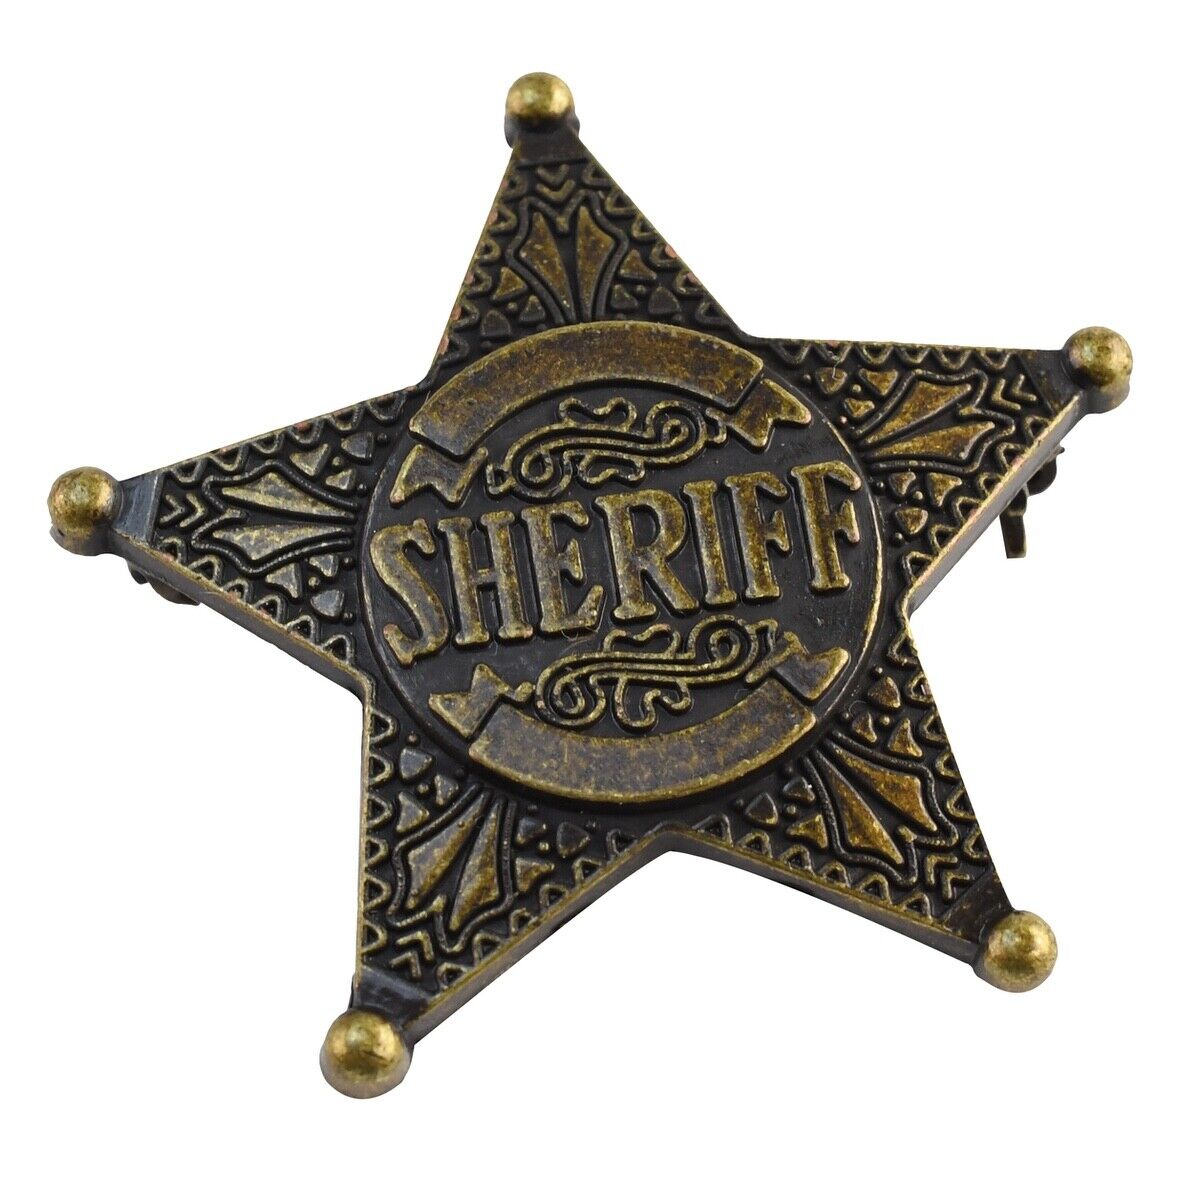 Old West Sheriff Star Badge Brass Lapel Pin Law Officer Police Costume Accessory